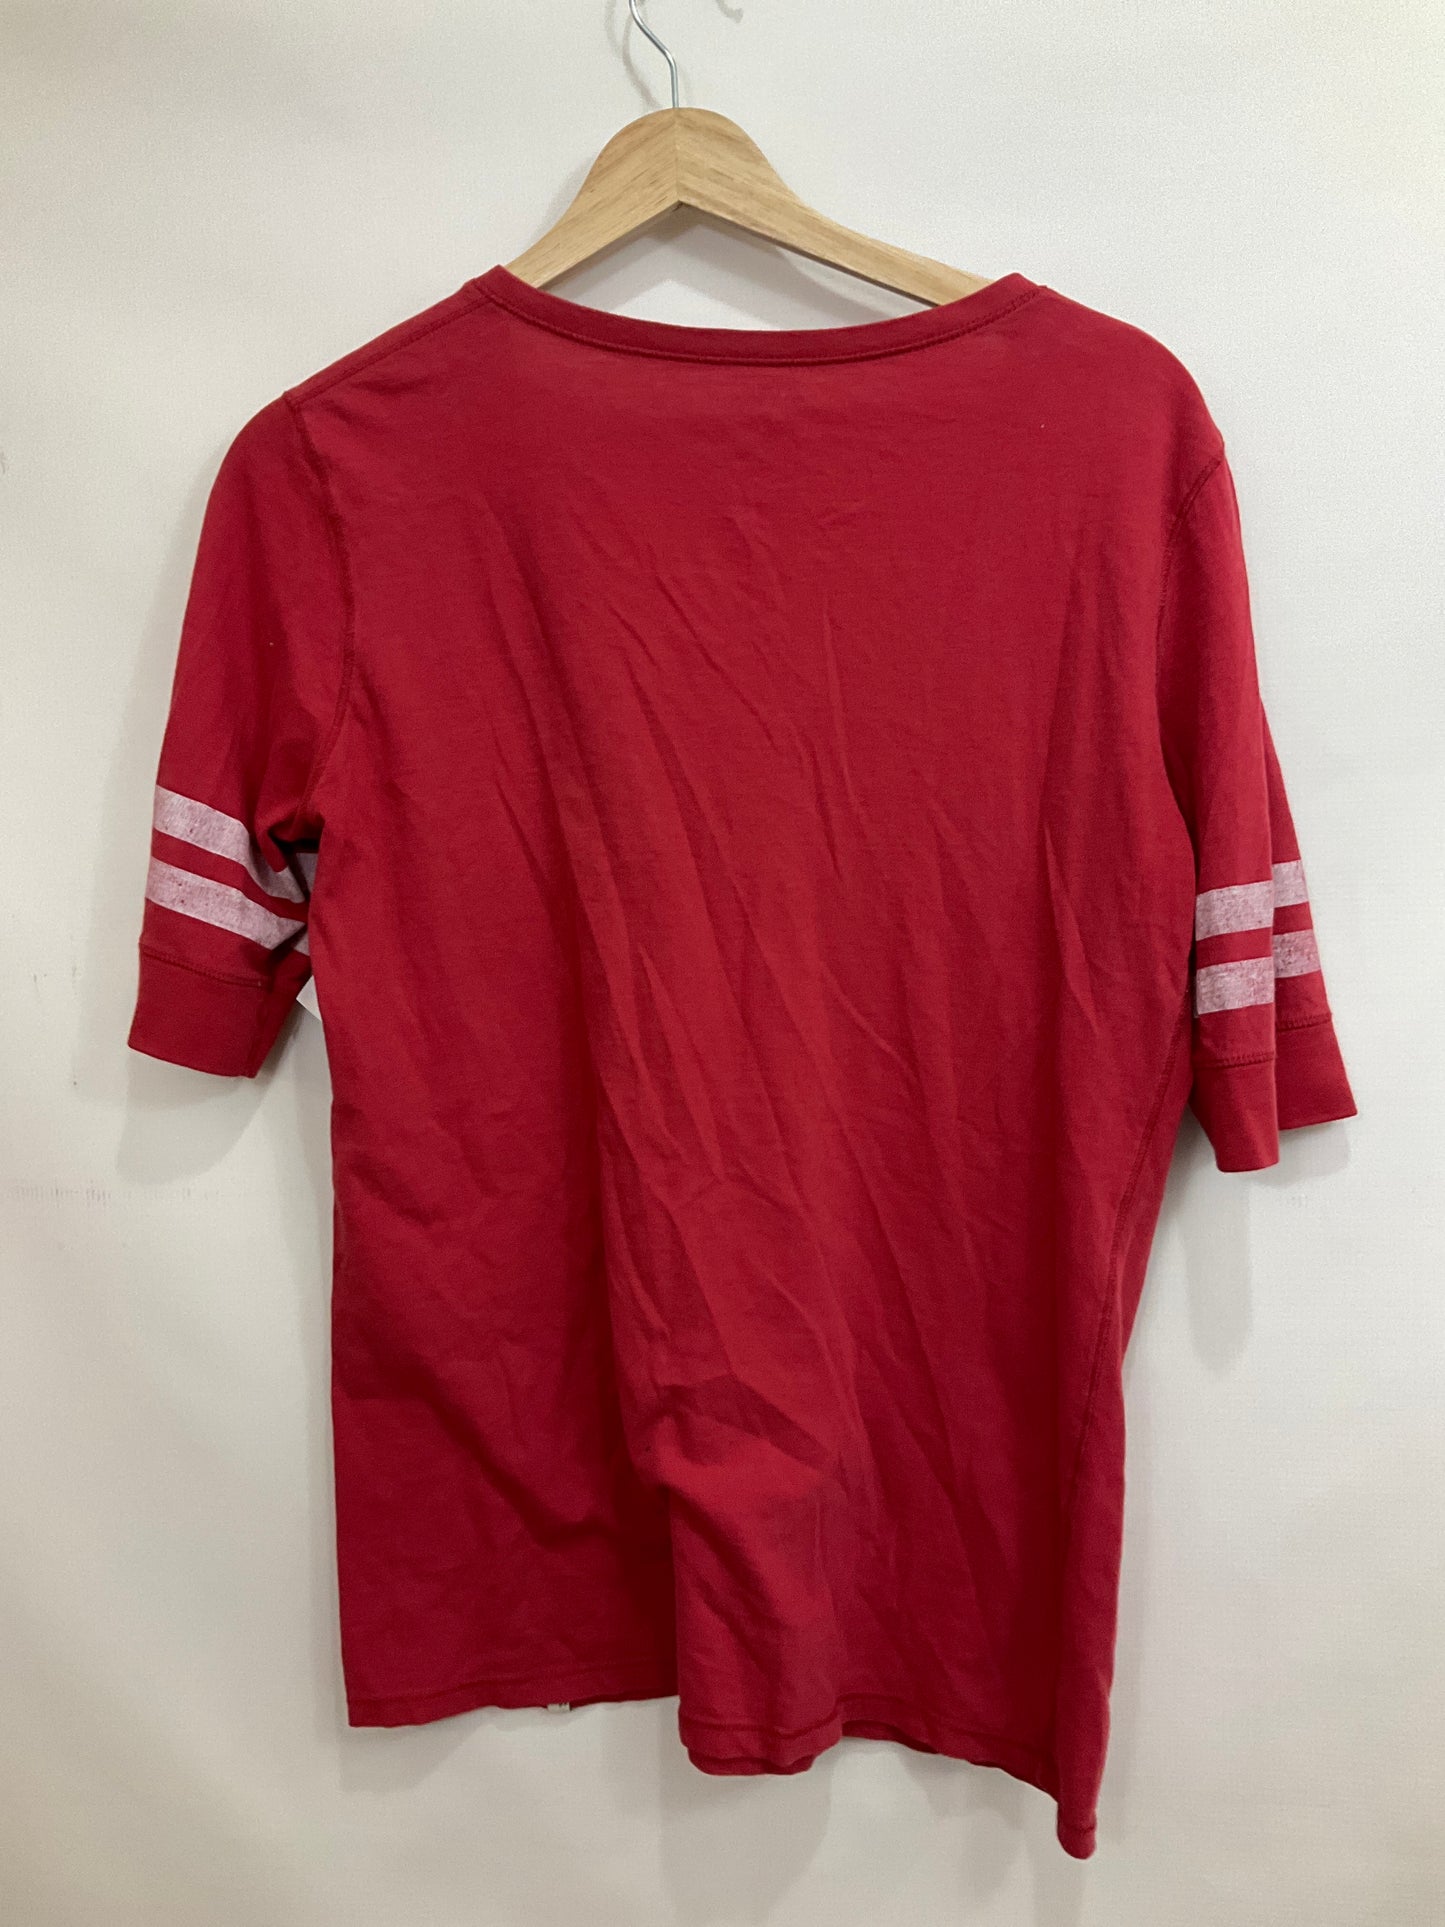 Athletic Top Short Sleeve By Cme  Size: Xl